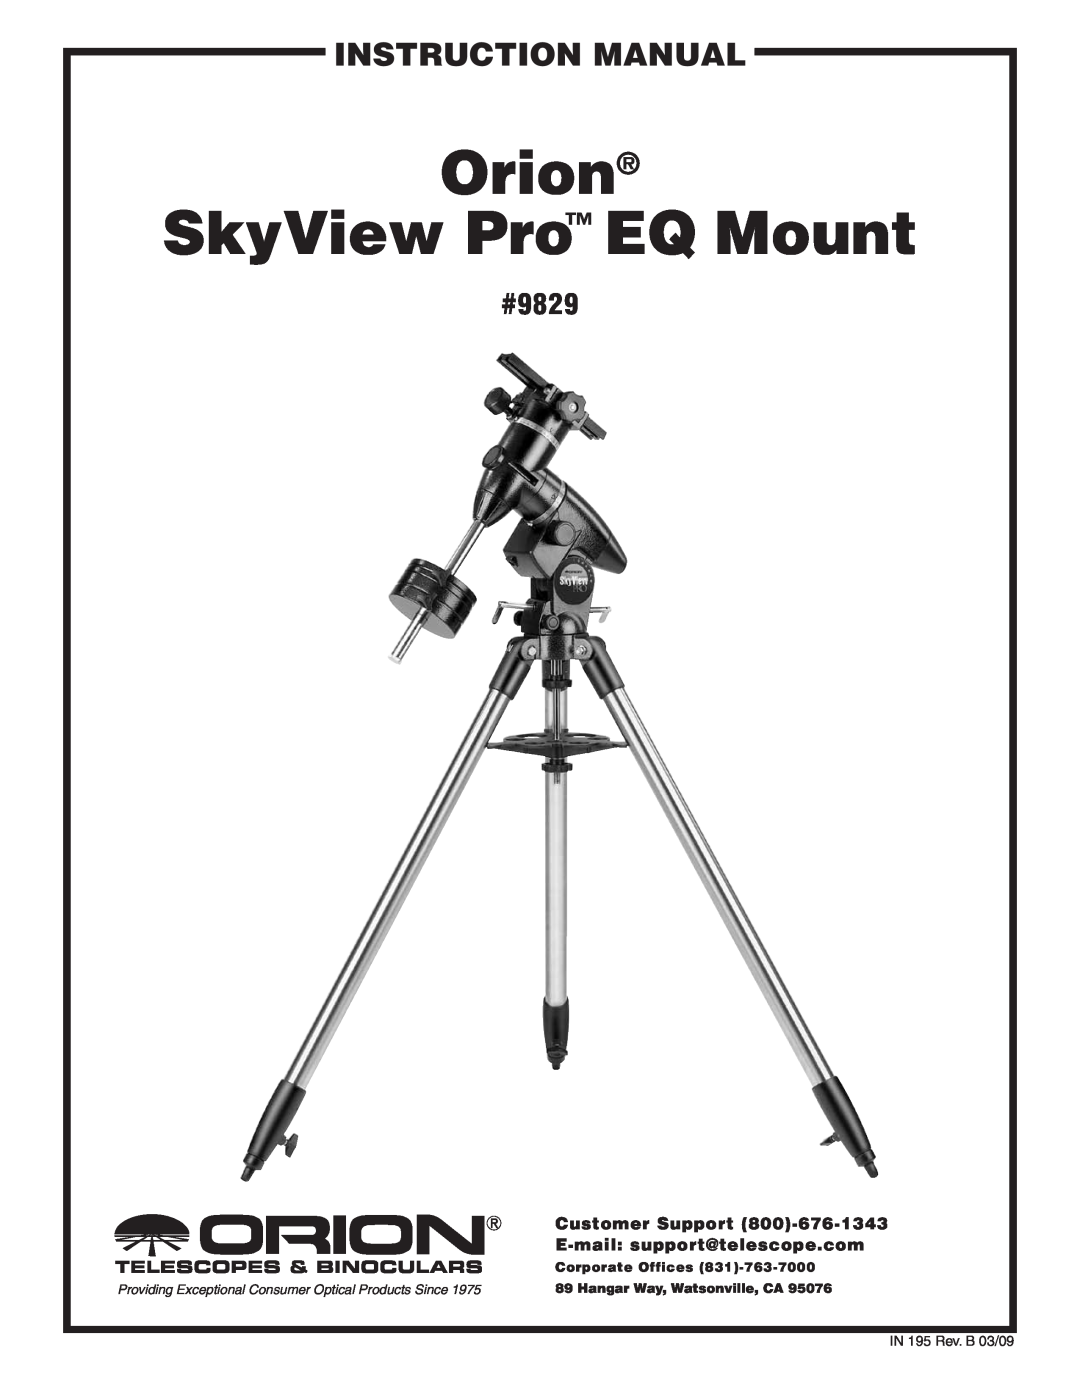 Orion instruction manual #9829, Customer Support 800‑676-1343, E-mail support@telescope.com, Orion SkyView Pro EQ Mount 